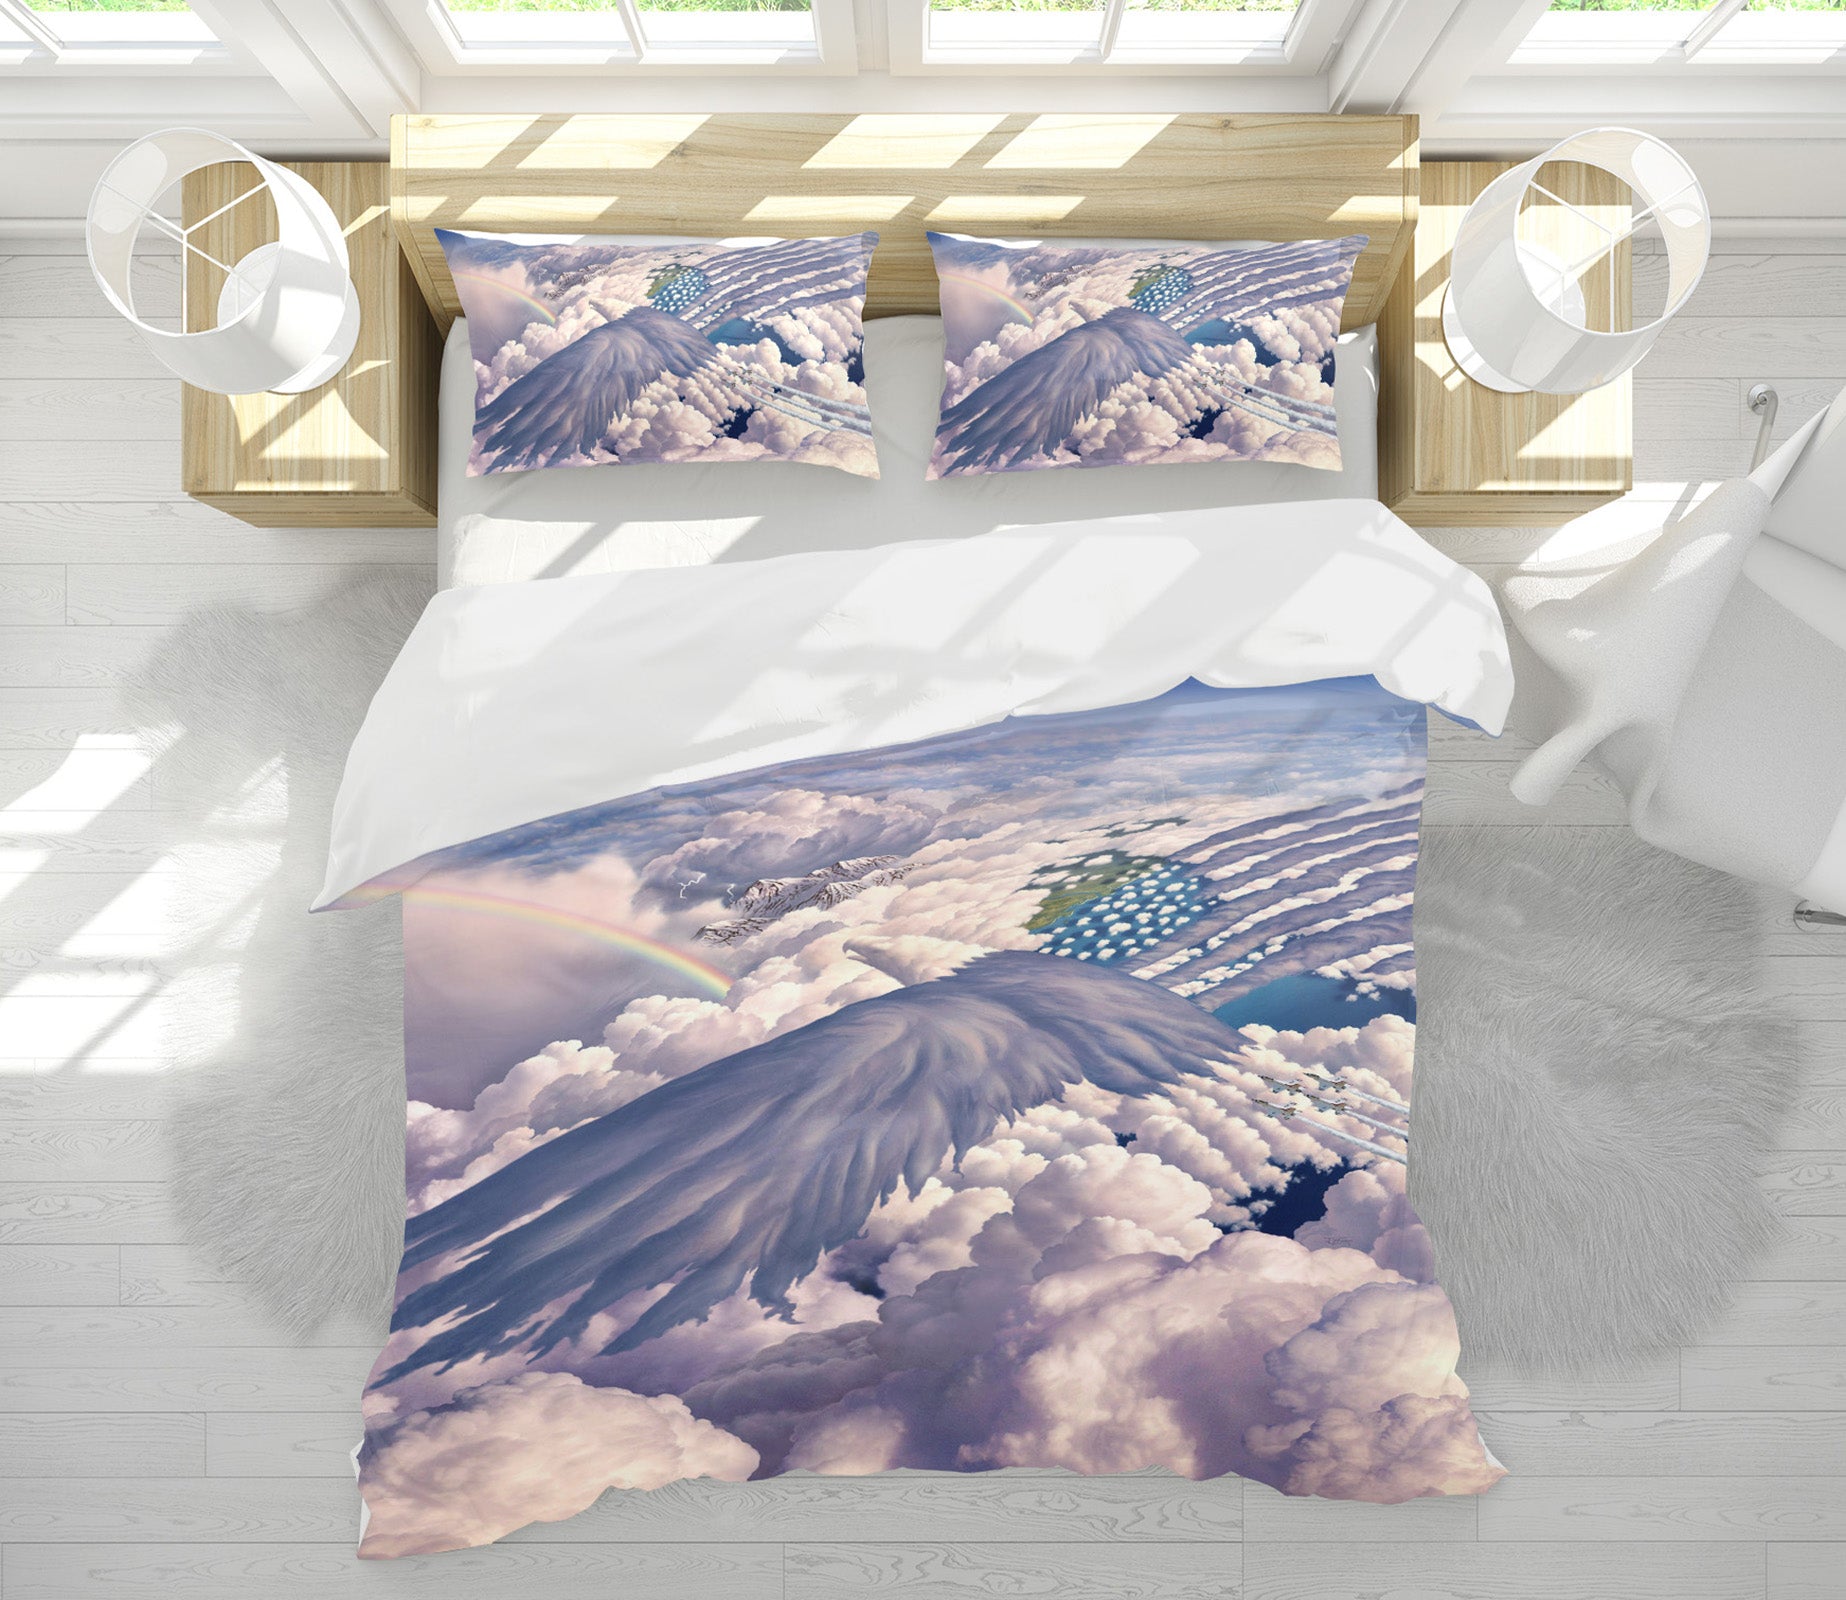 3D Clouds 86035 Jerry LoFaro bedding Bed Pillowcases Quilt